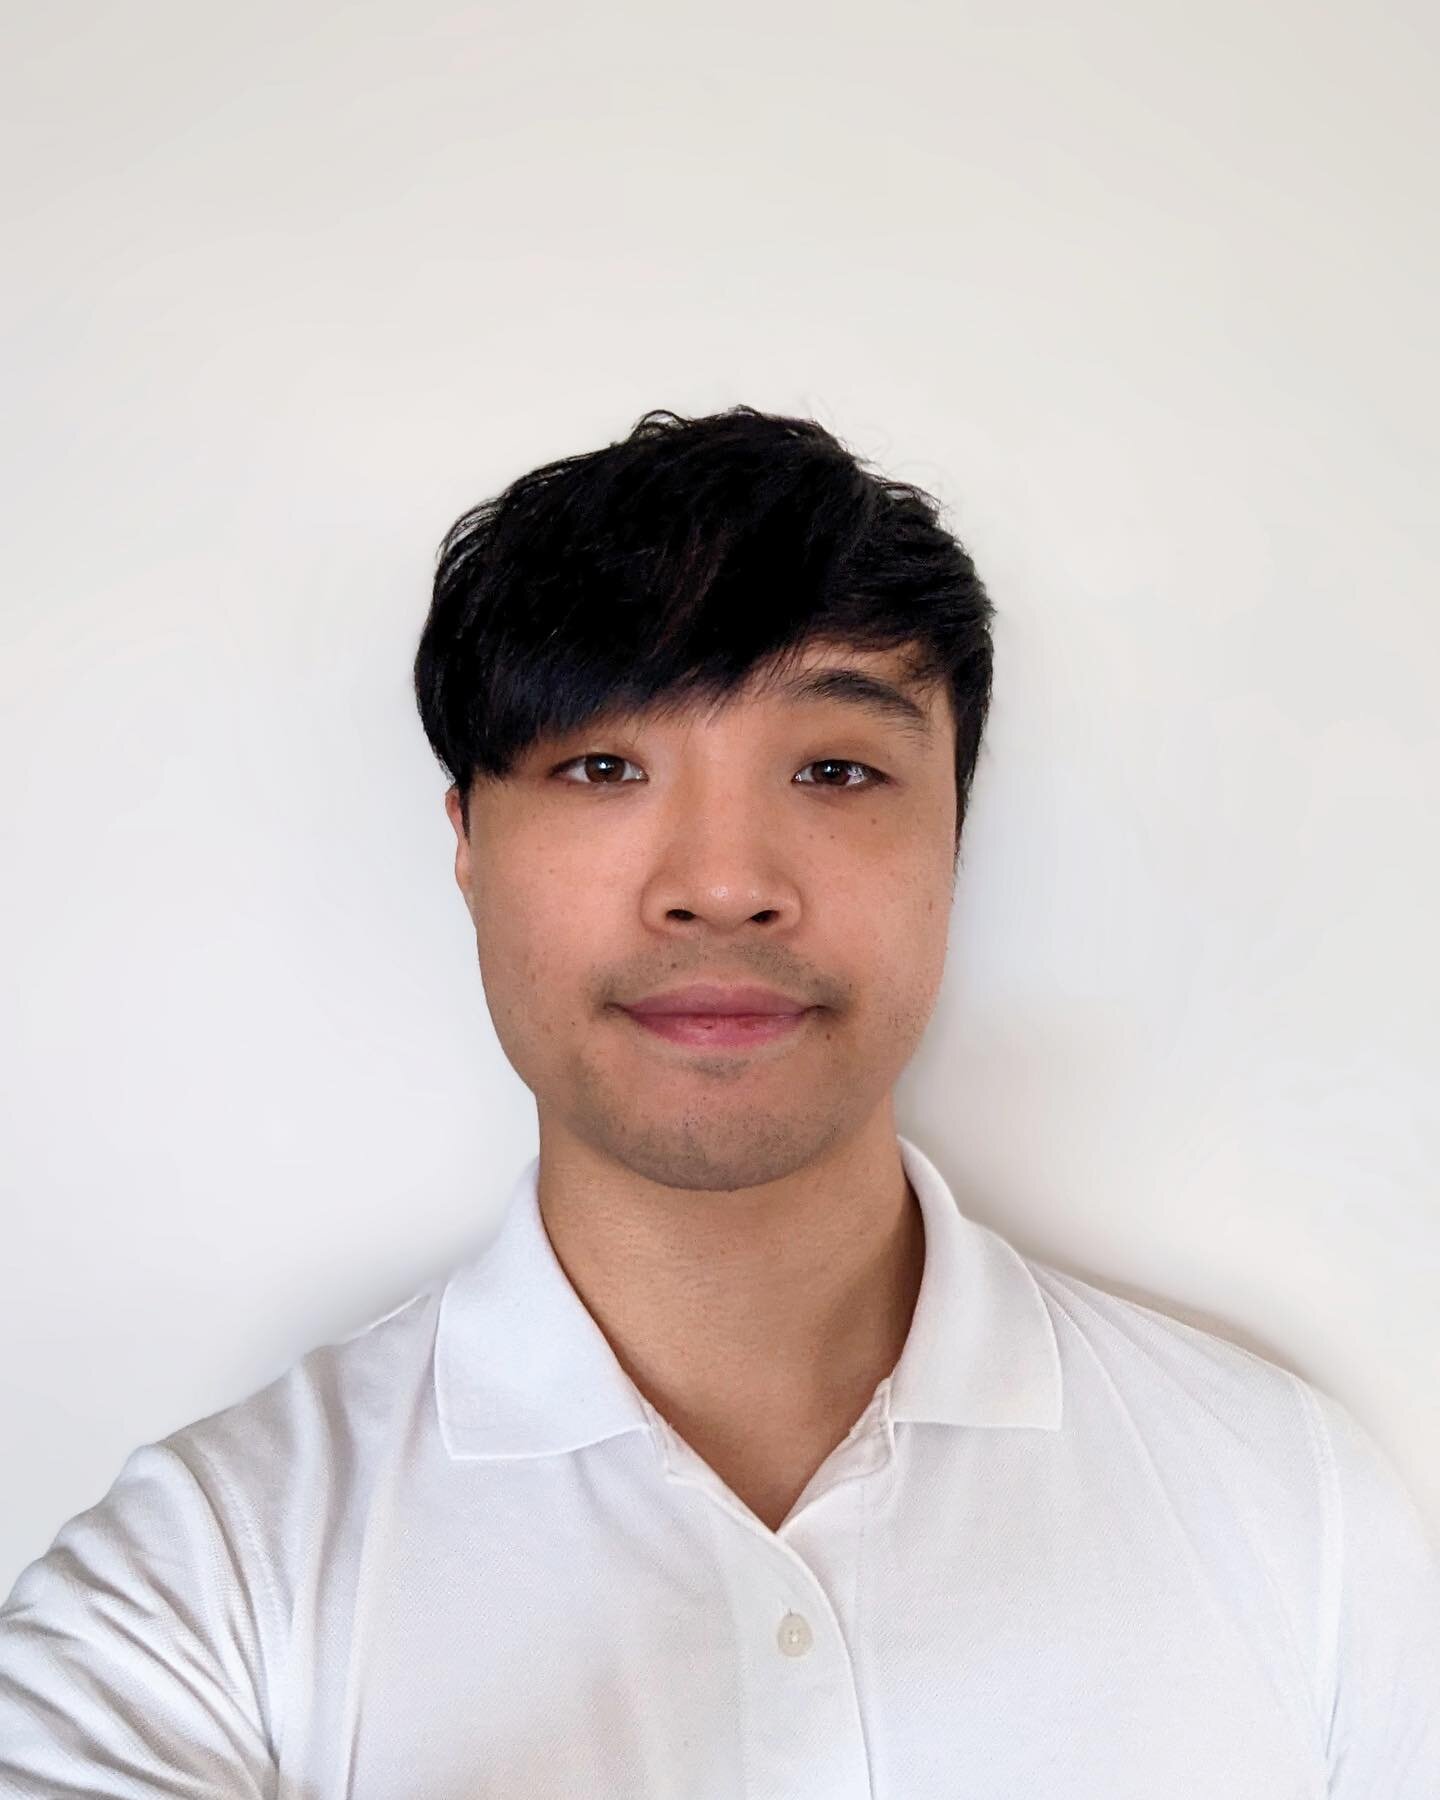 Introducing Sport Physio Thomas Wang!! Newly joined physiotherapist. Welcome to Sydney Health Physiotherapy! Our patients can really use your expertise!  #physioexperts #healthcareheroes #physioteam #experttherapists #physioclinic #dedicatedcare #hea